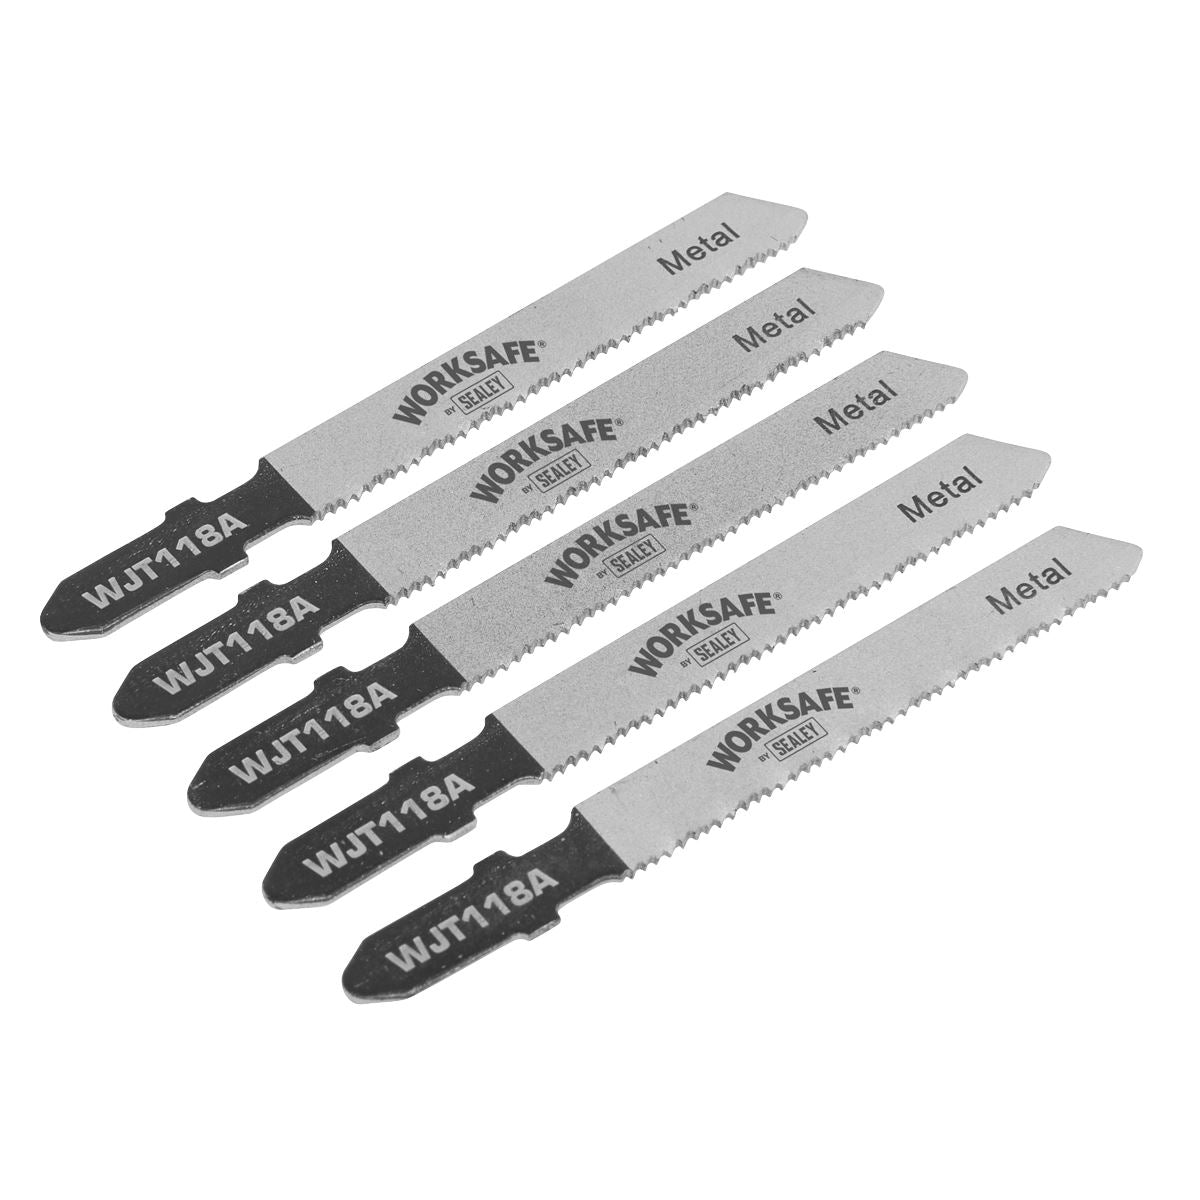 Worksafe by Sealey Jigsaw Blade Metal 55mm 21tpi - Pack of 5